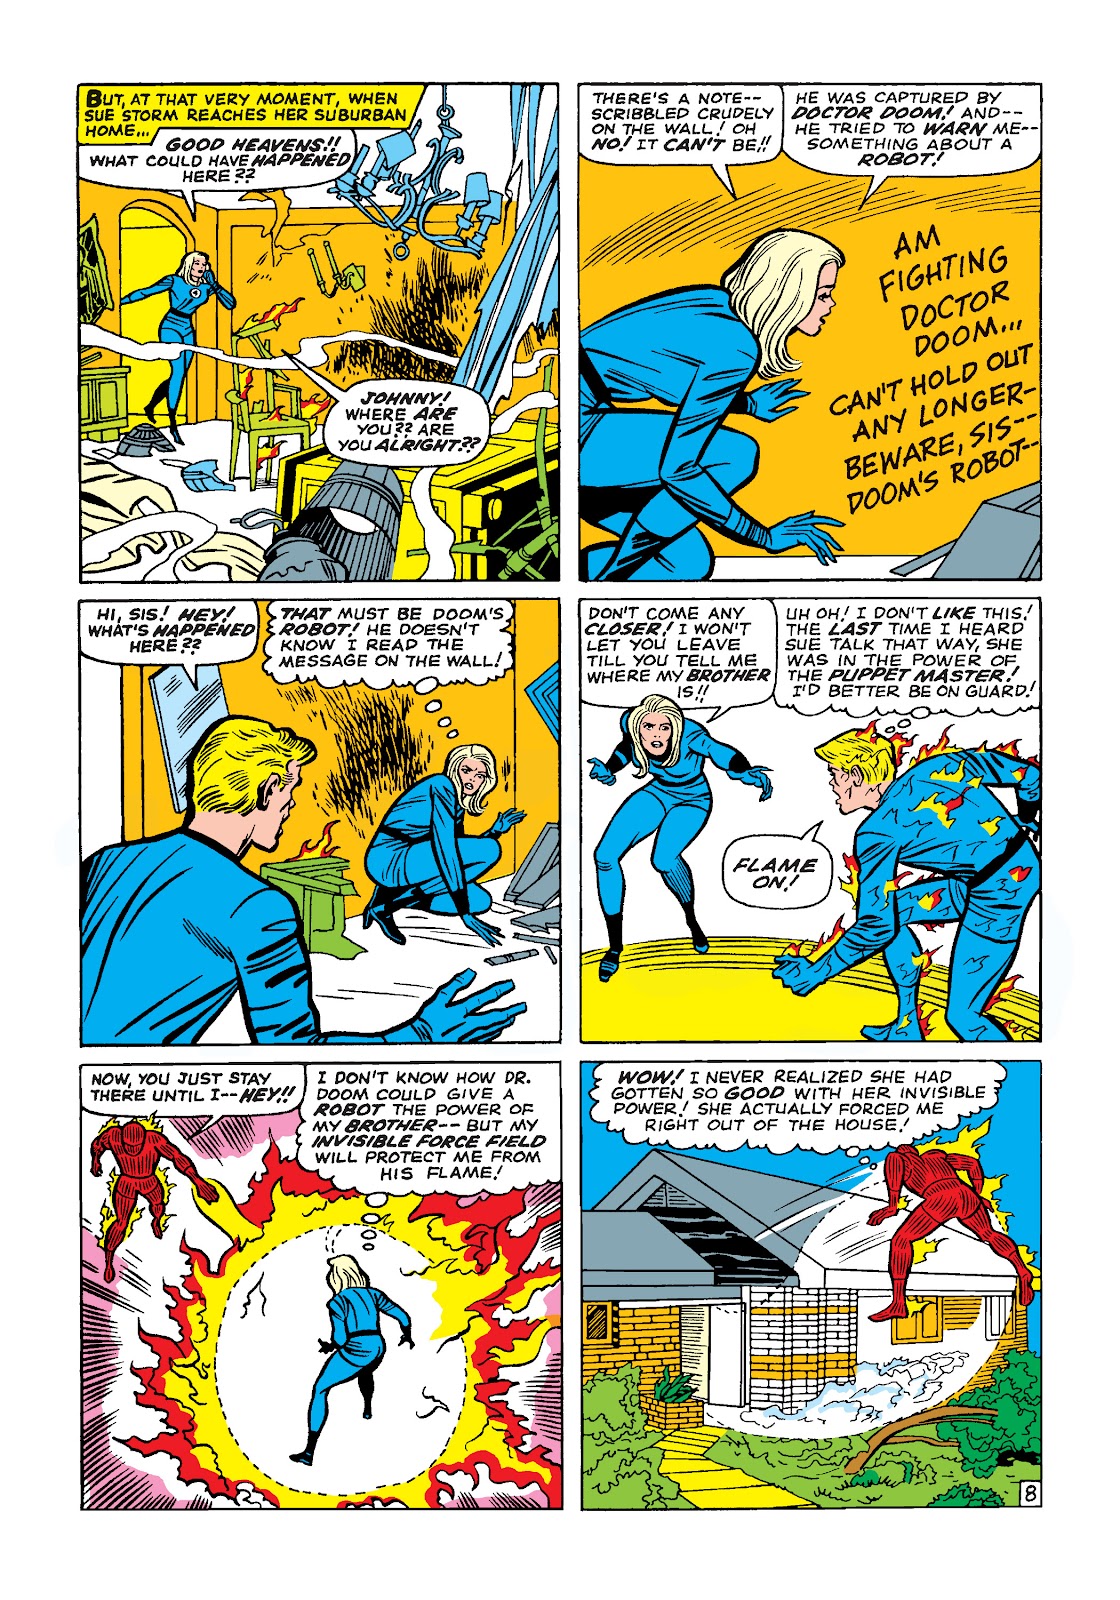 Read online Marvel Masterworks: The Fantastic Four comic - Issue # TPB 4 (Part 2) - 30